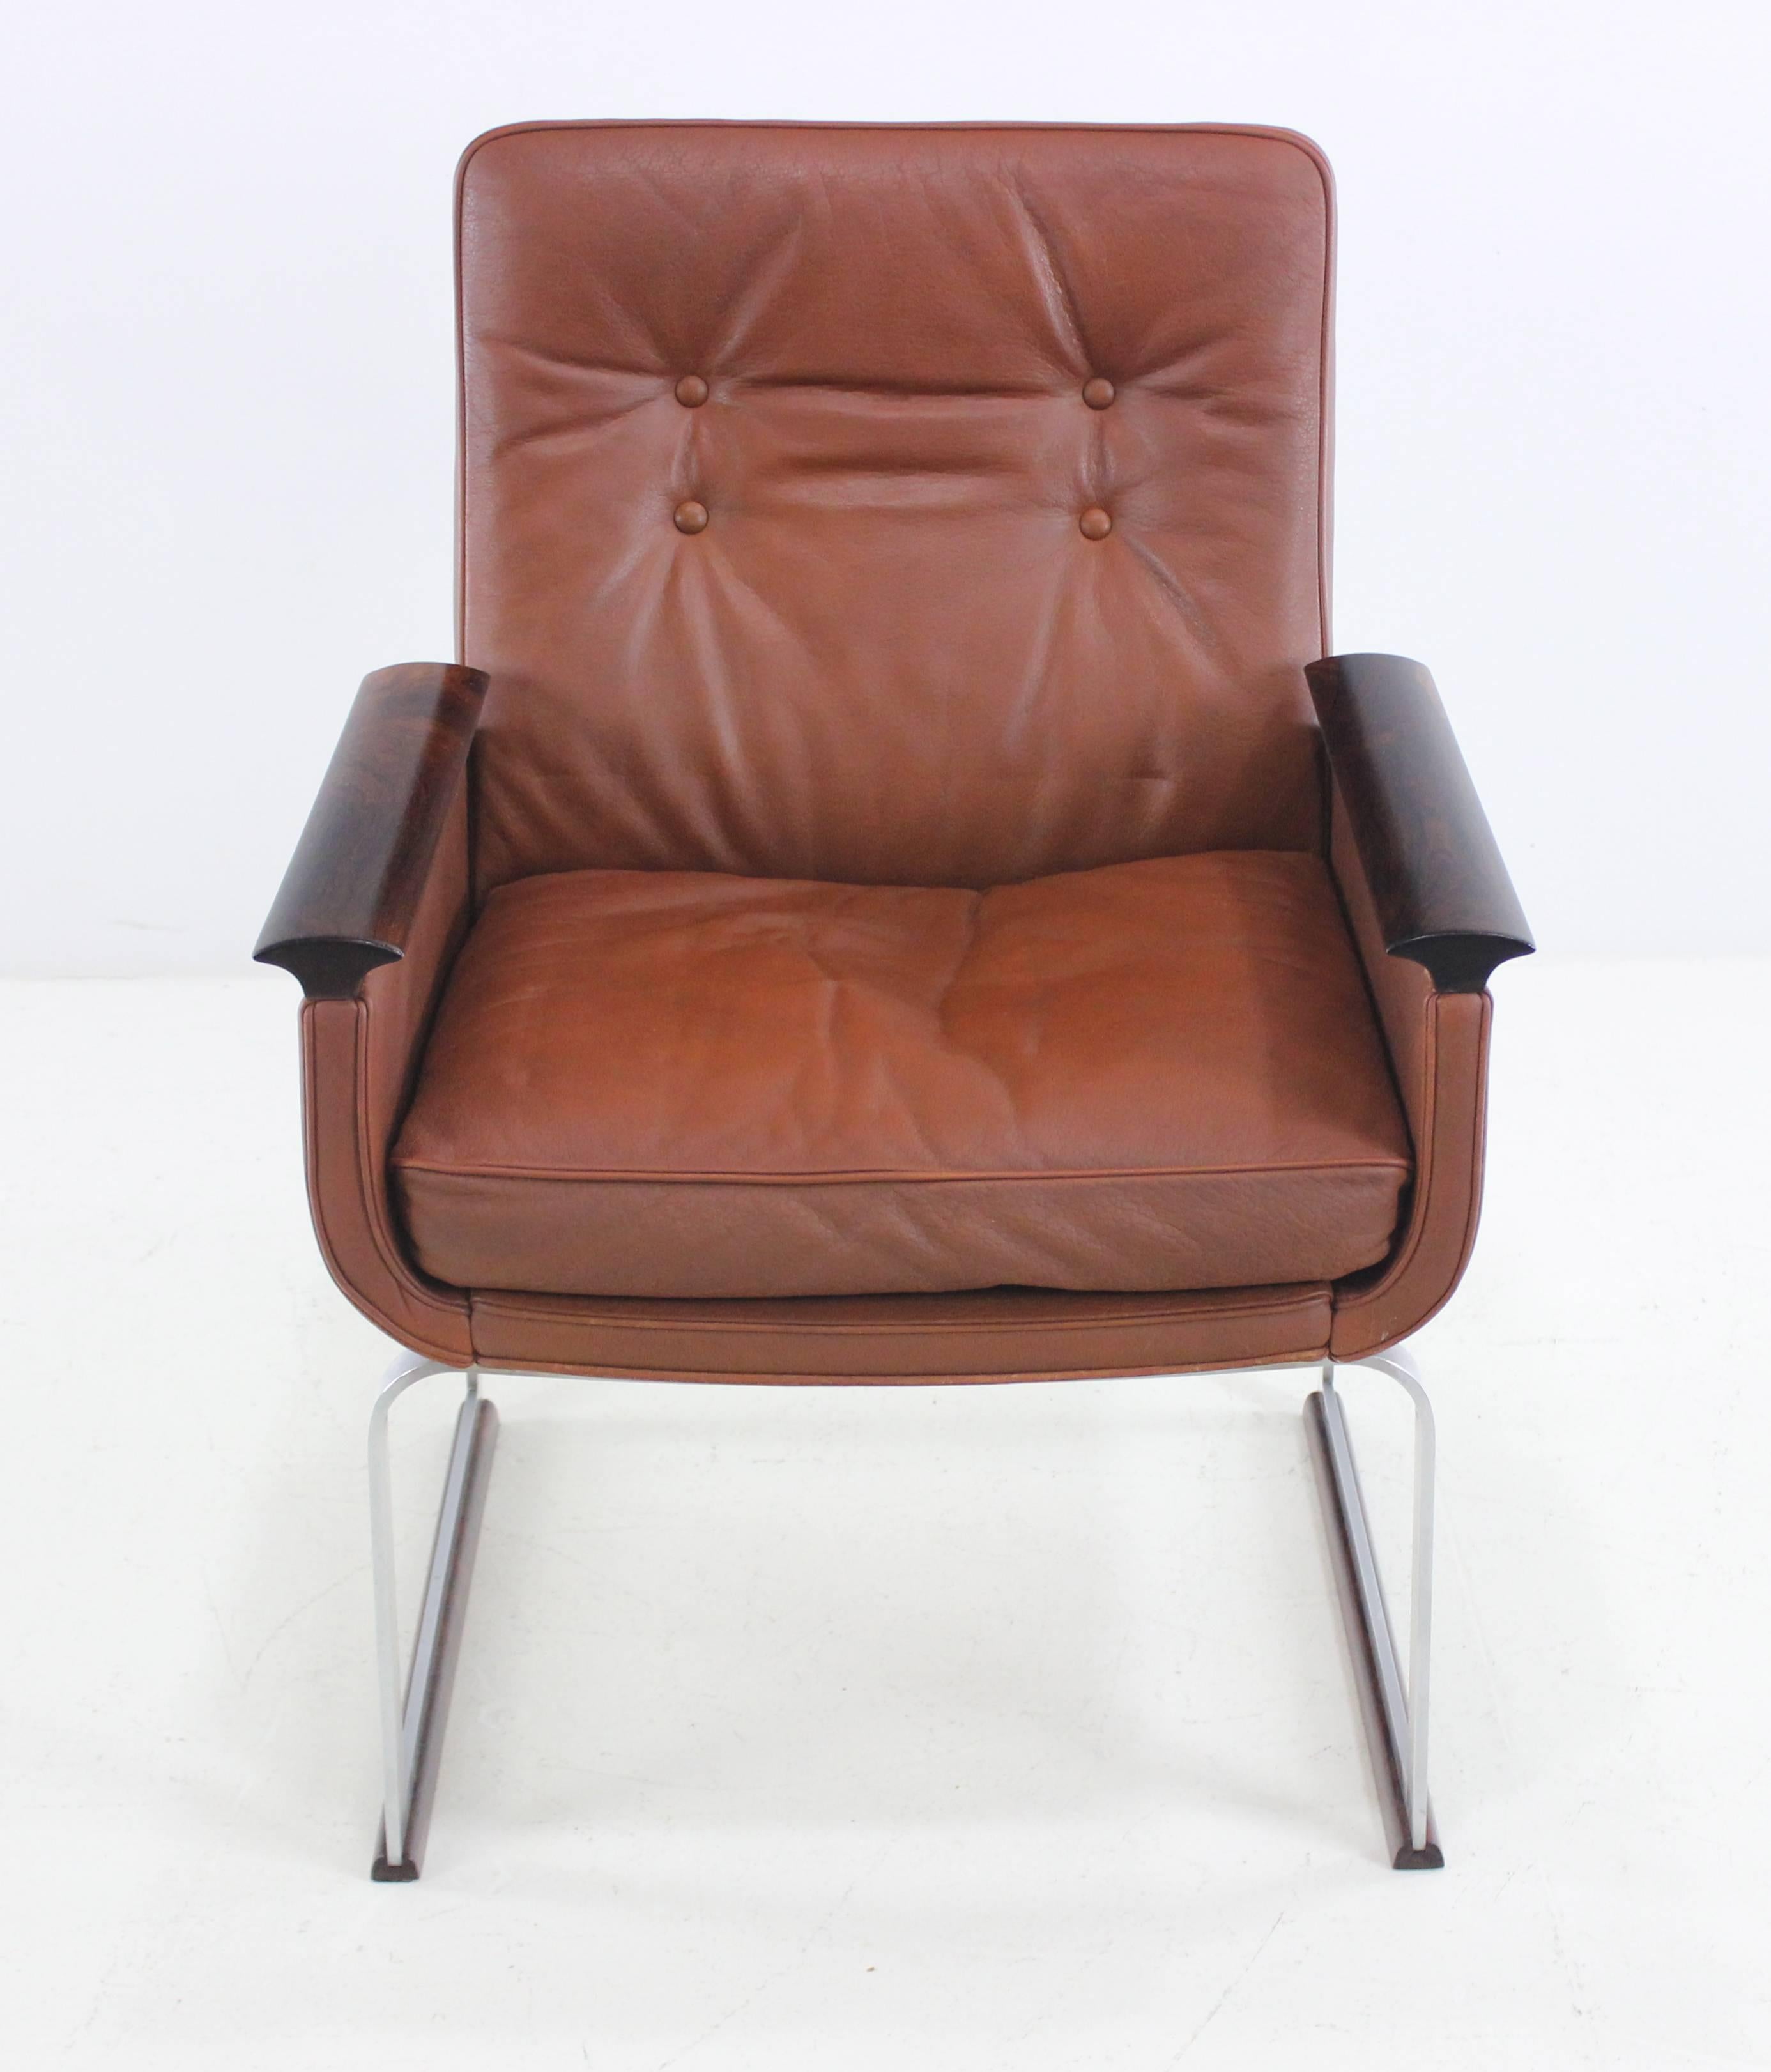 Scandinavian Modern Pair of Danish Modern Steel and Leather Armchairs by Vatne Mobler For Sale